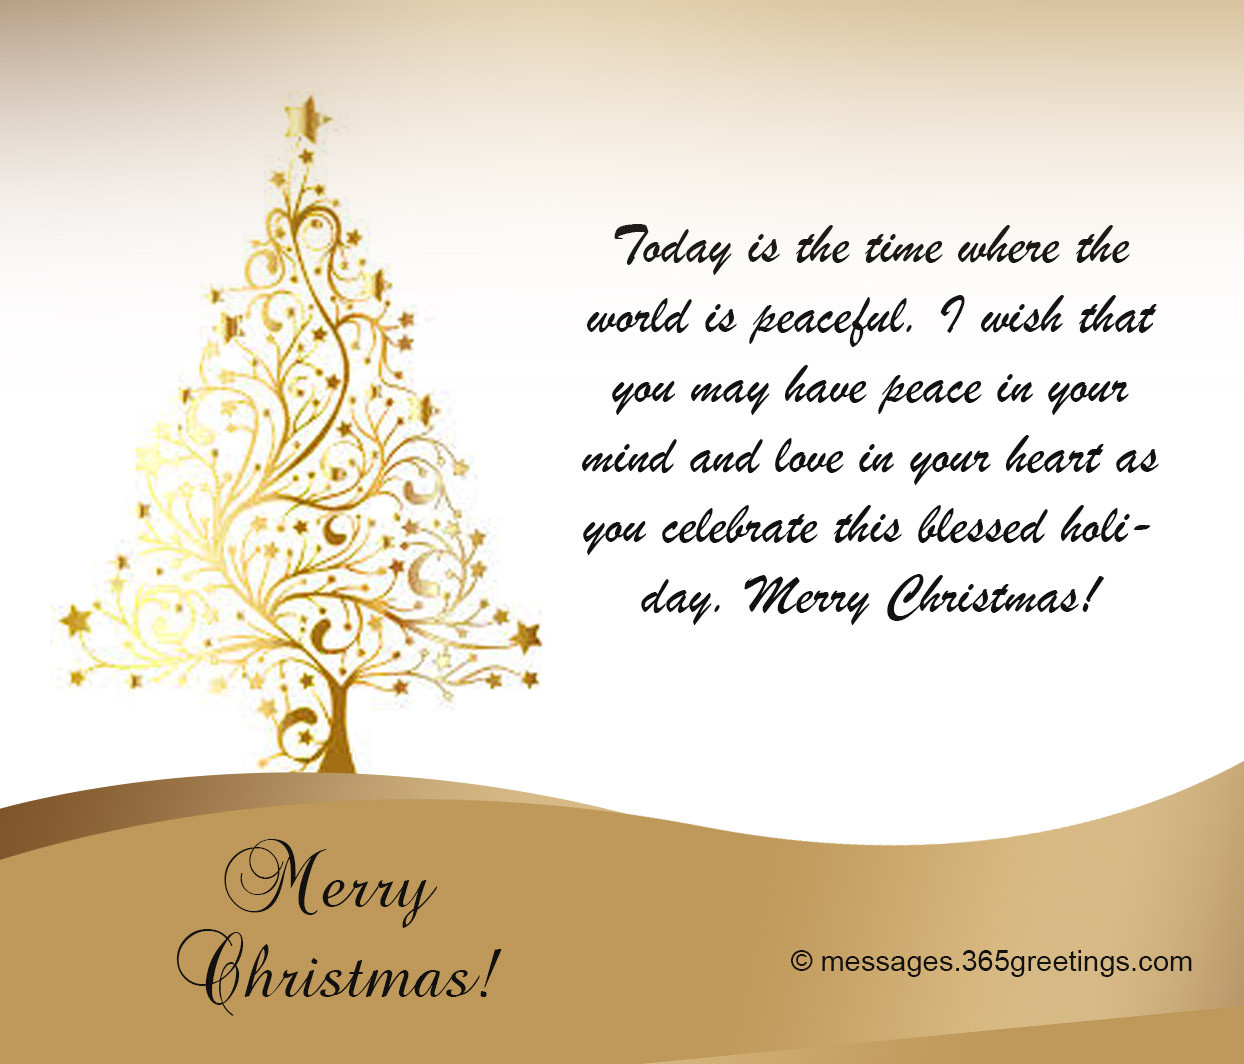 Christmas Greetings Quotes
 Best Christmas Card Sayings and Greetings 365greetings